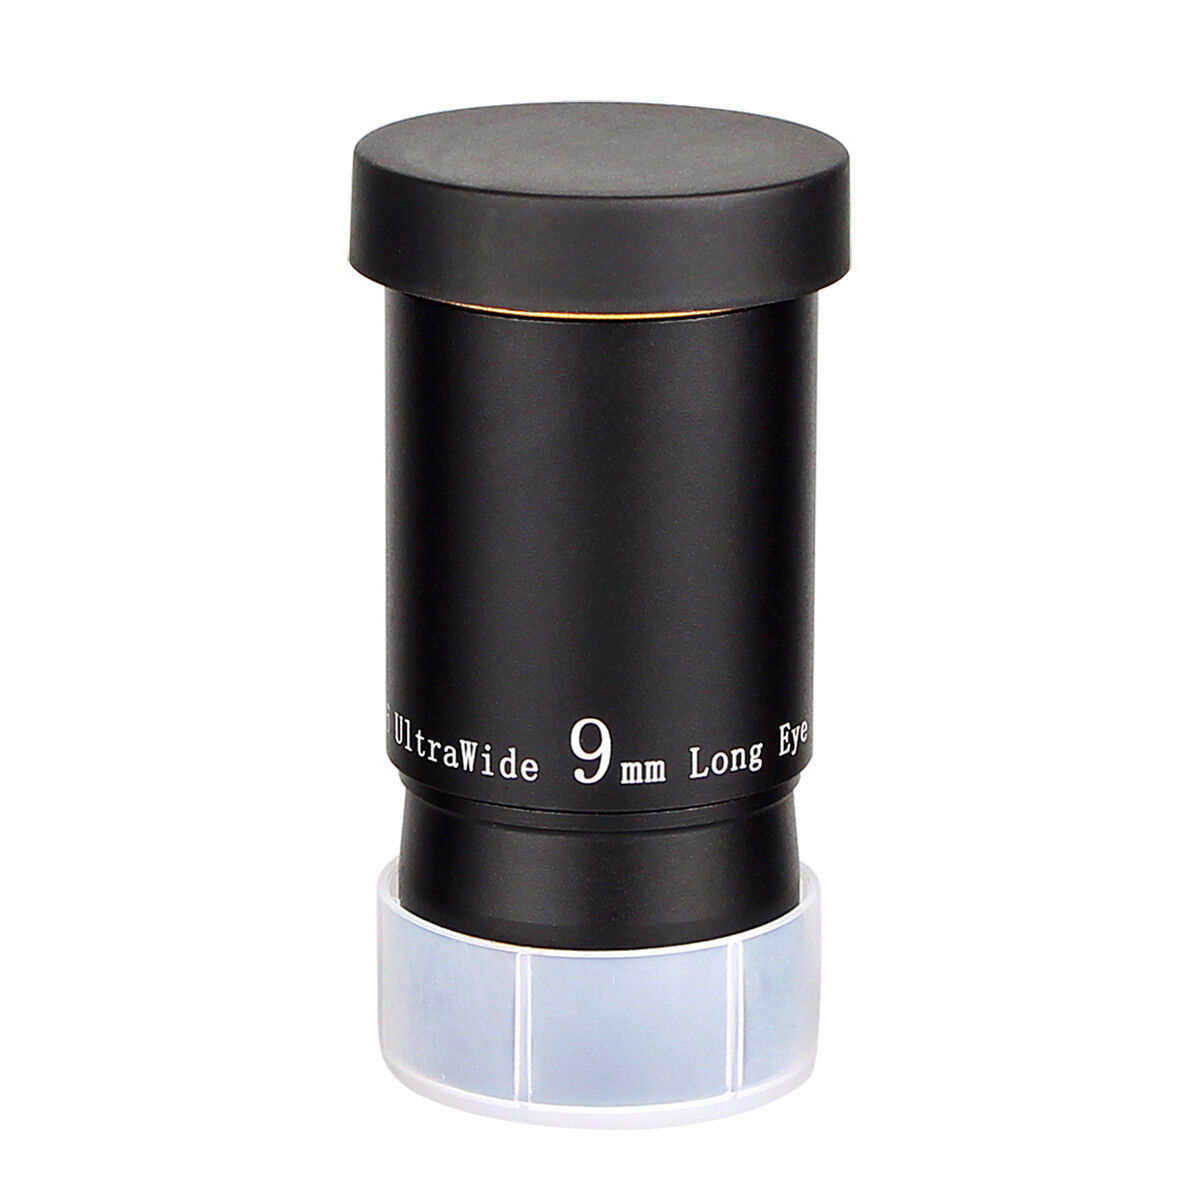 SVBONY 1.25\'\' Ultra Wide Angle Eyepiece Lens 9mm 66° Multicoated for Telescope